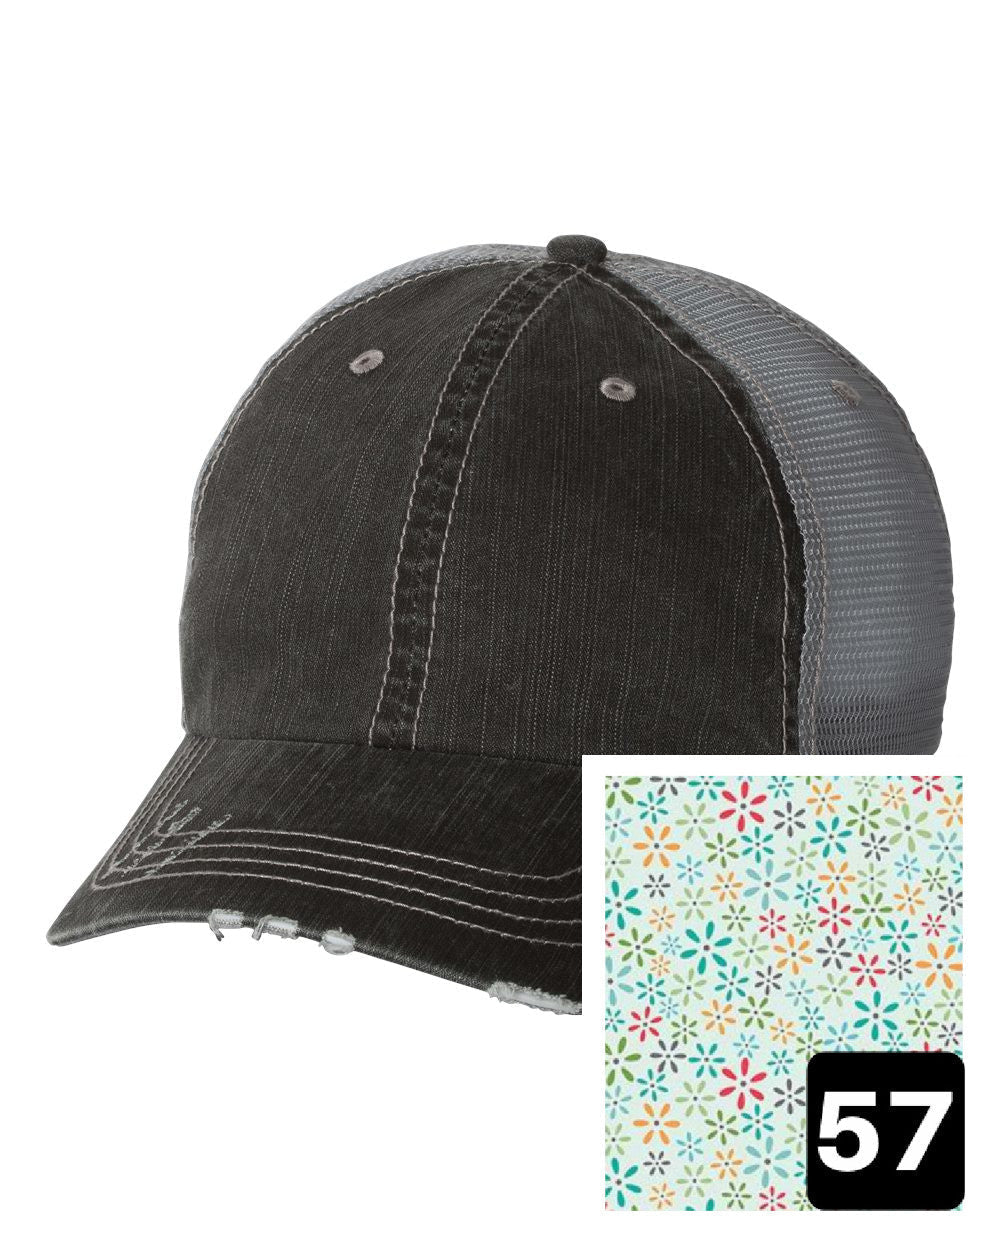 gray distressed trucker hat with white daisy on yellow fabric state of West Virginia